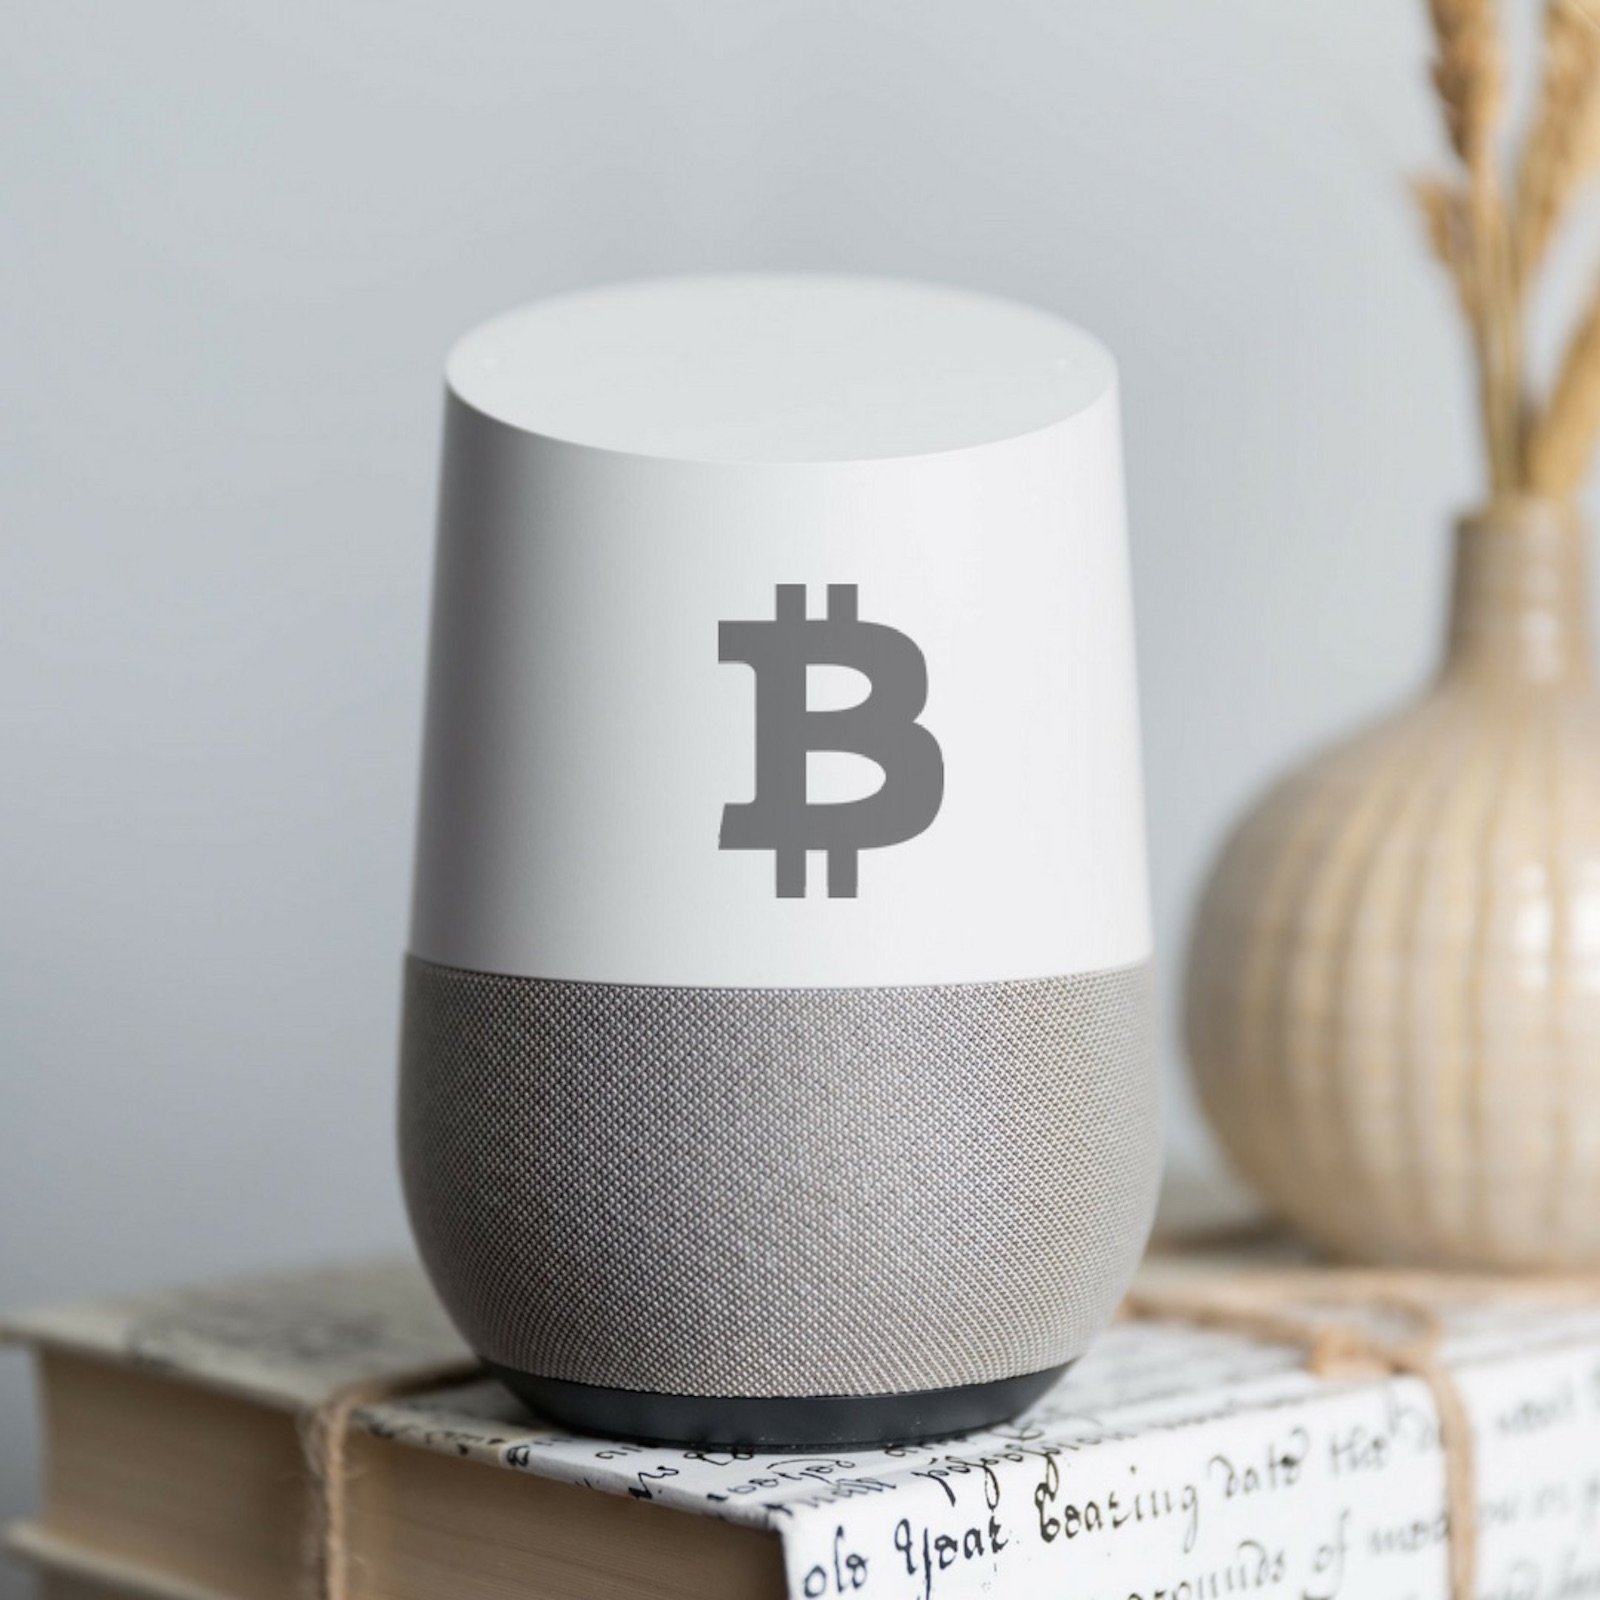 Google Home’s “Mr Satoshi” is Your Cryptocurrency Personal Assistant